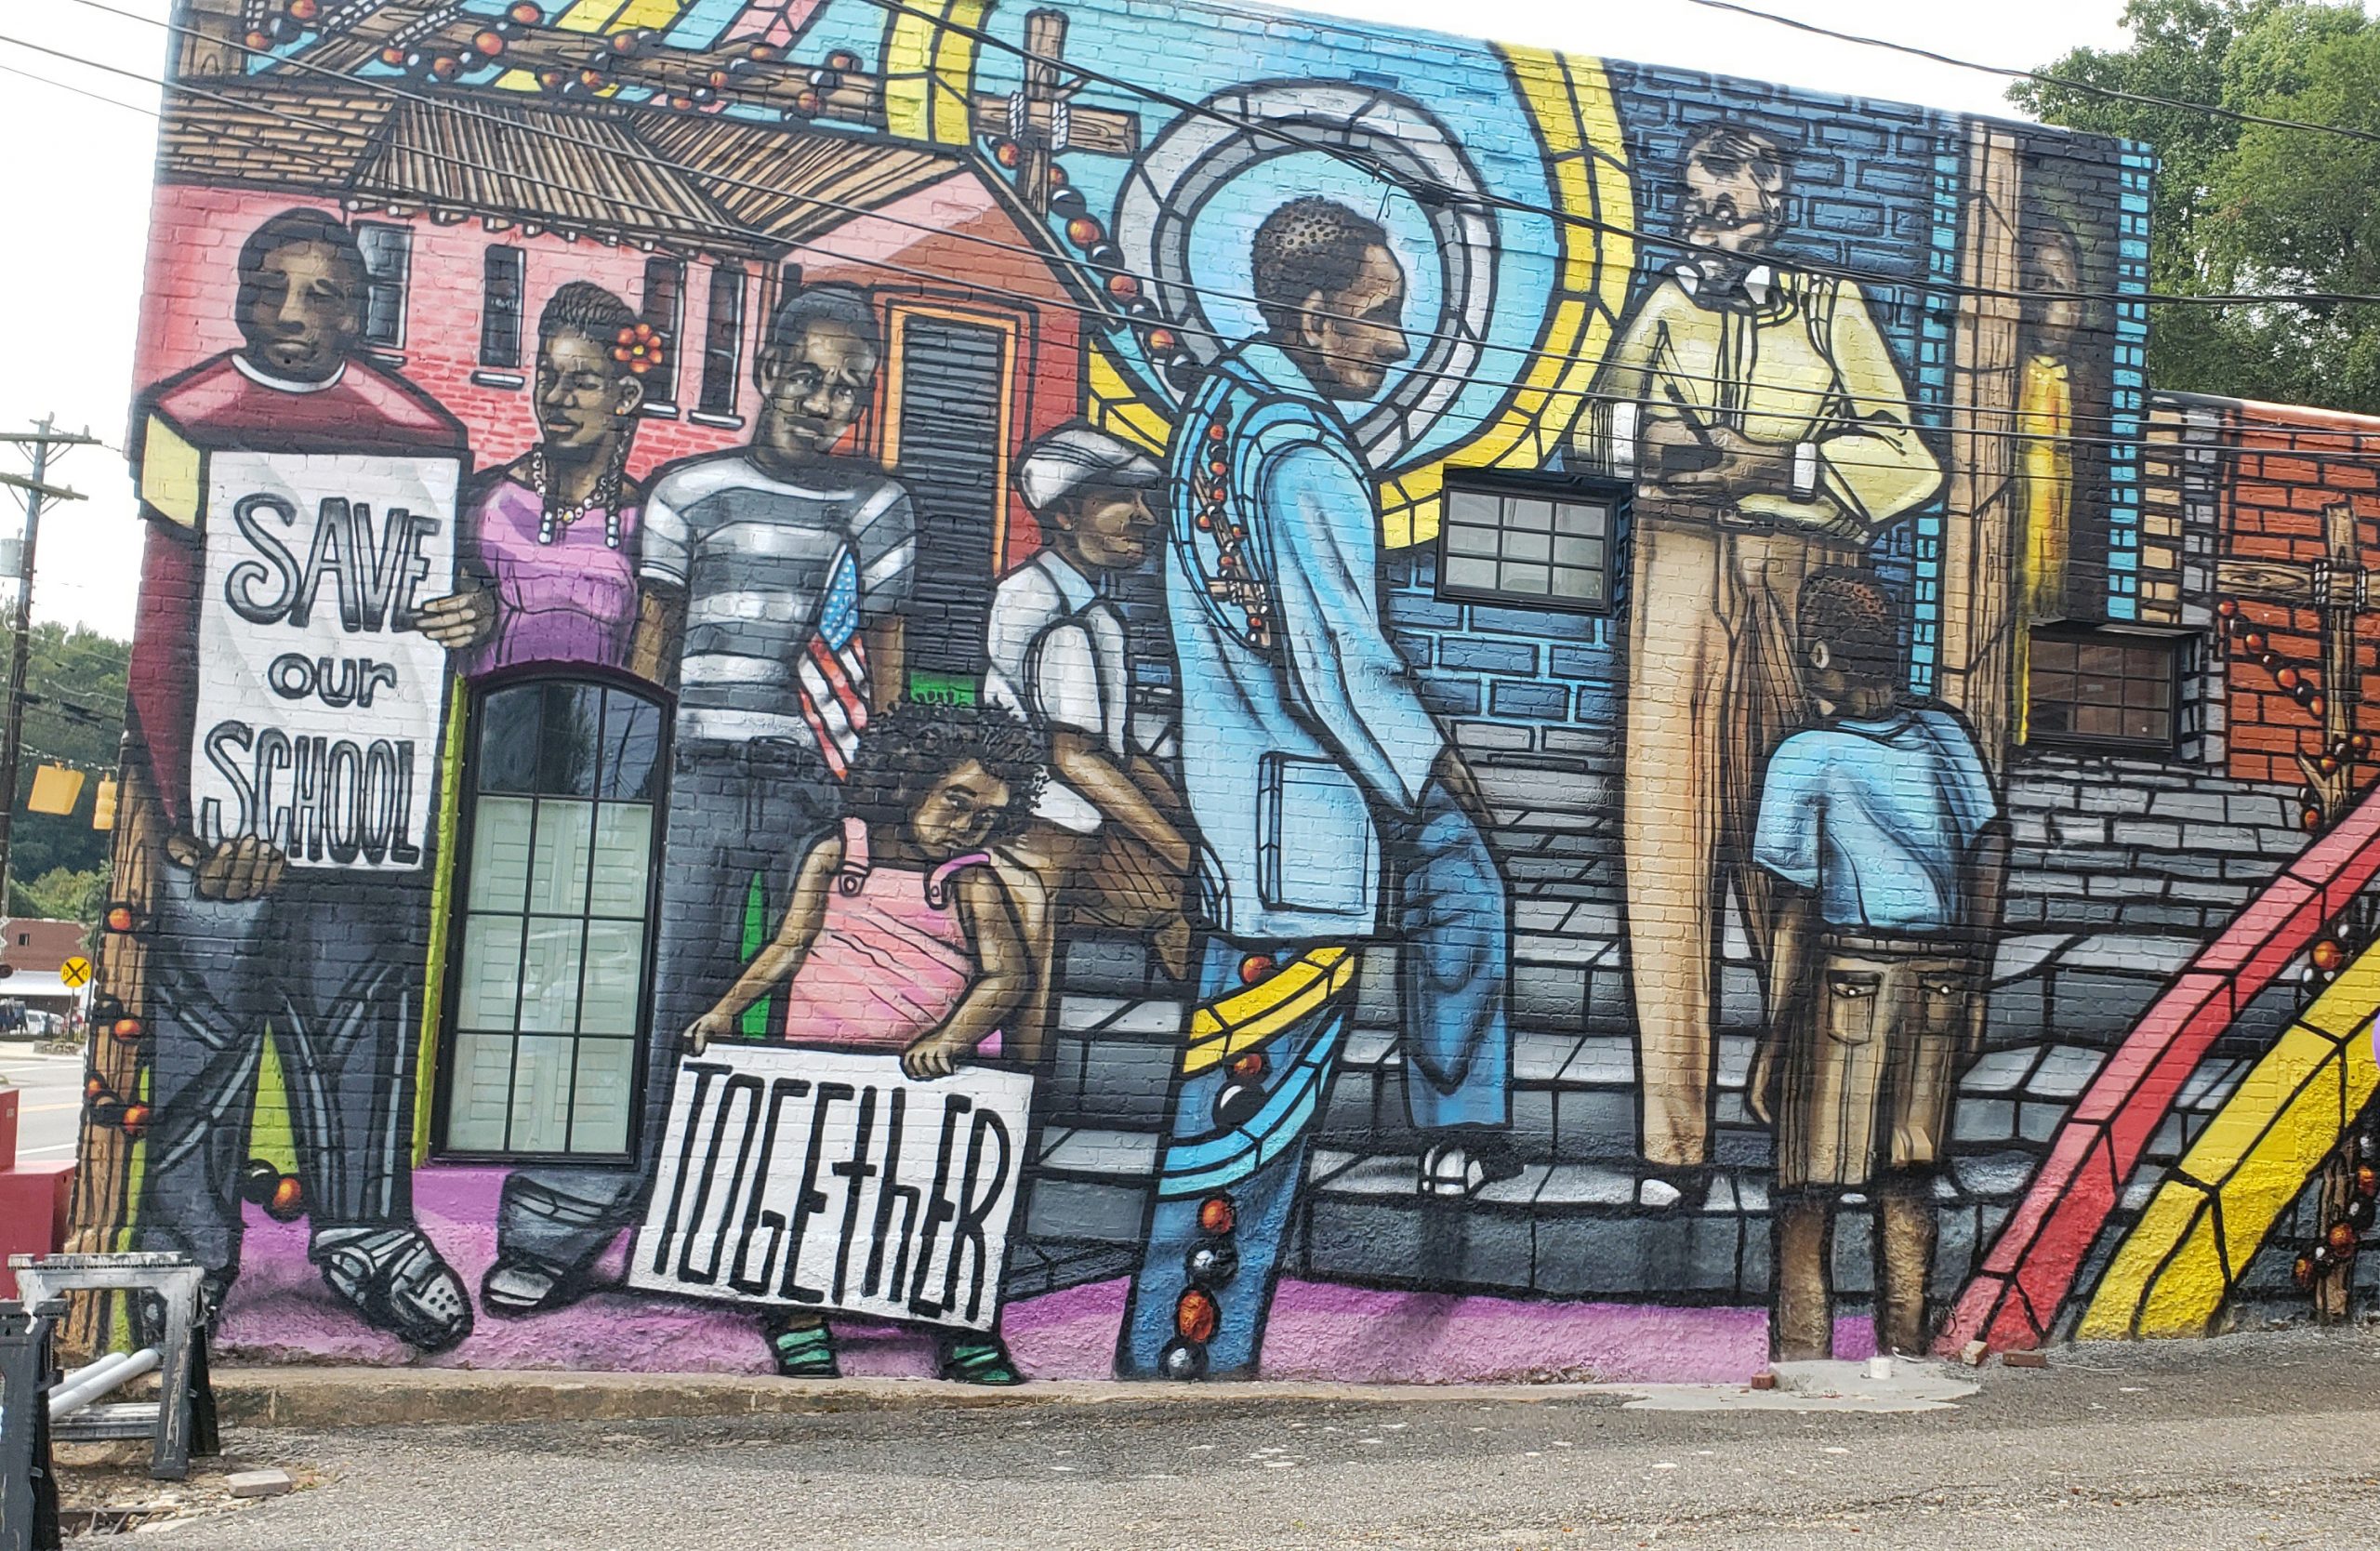 A colorful mural in downtown Old Fort depicts the town's local history as it relates to the national struggle for civil rights.